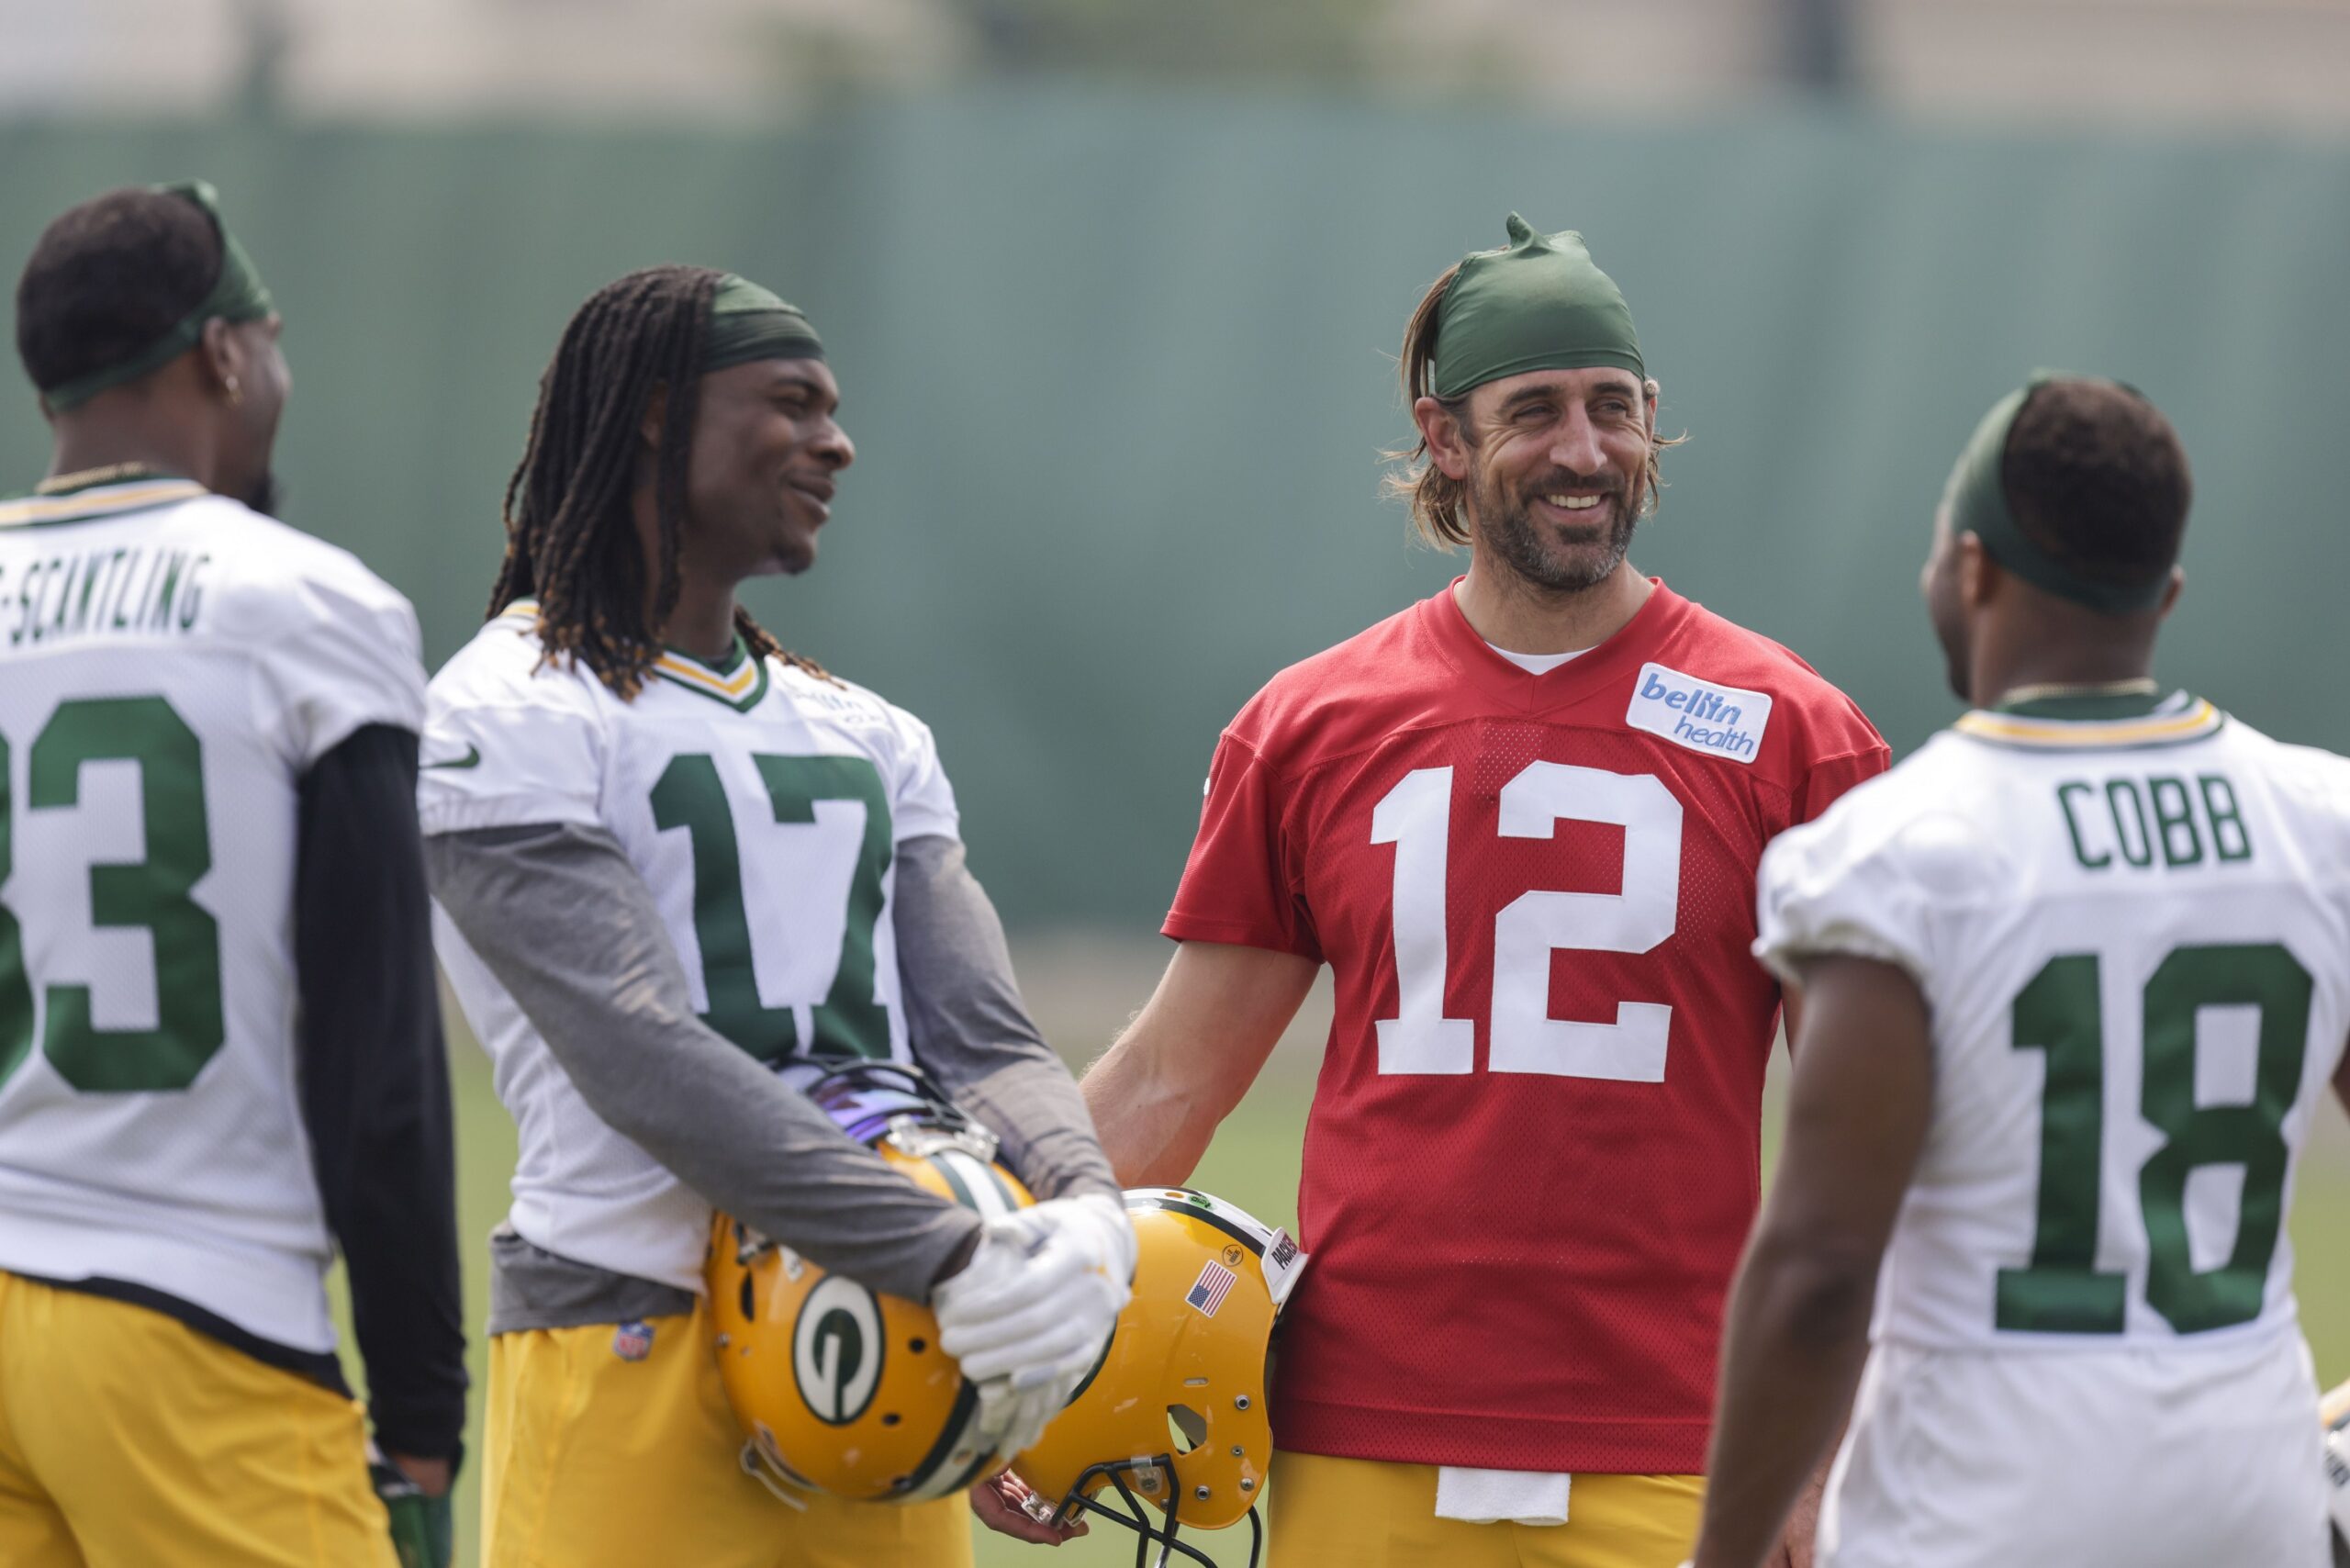 Uncertain futures add to sense of urgency for Rodgers, Adams